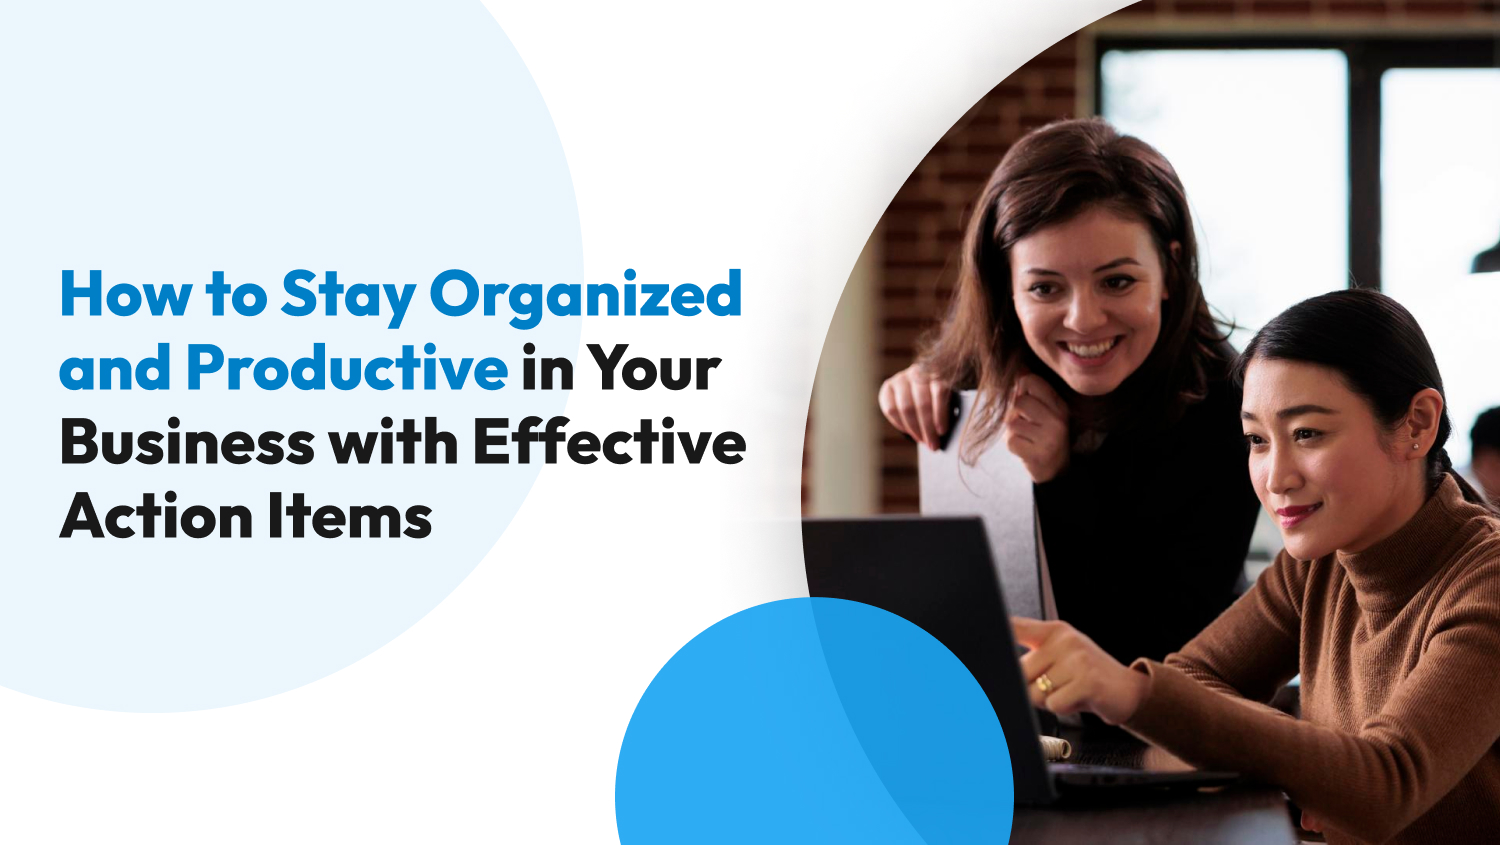 How to Stay Organized and Productive in Your Business with Effective Action Items